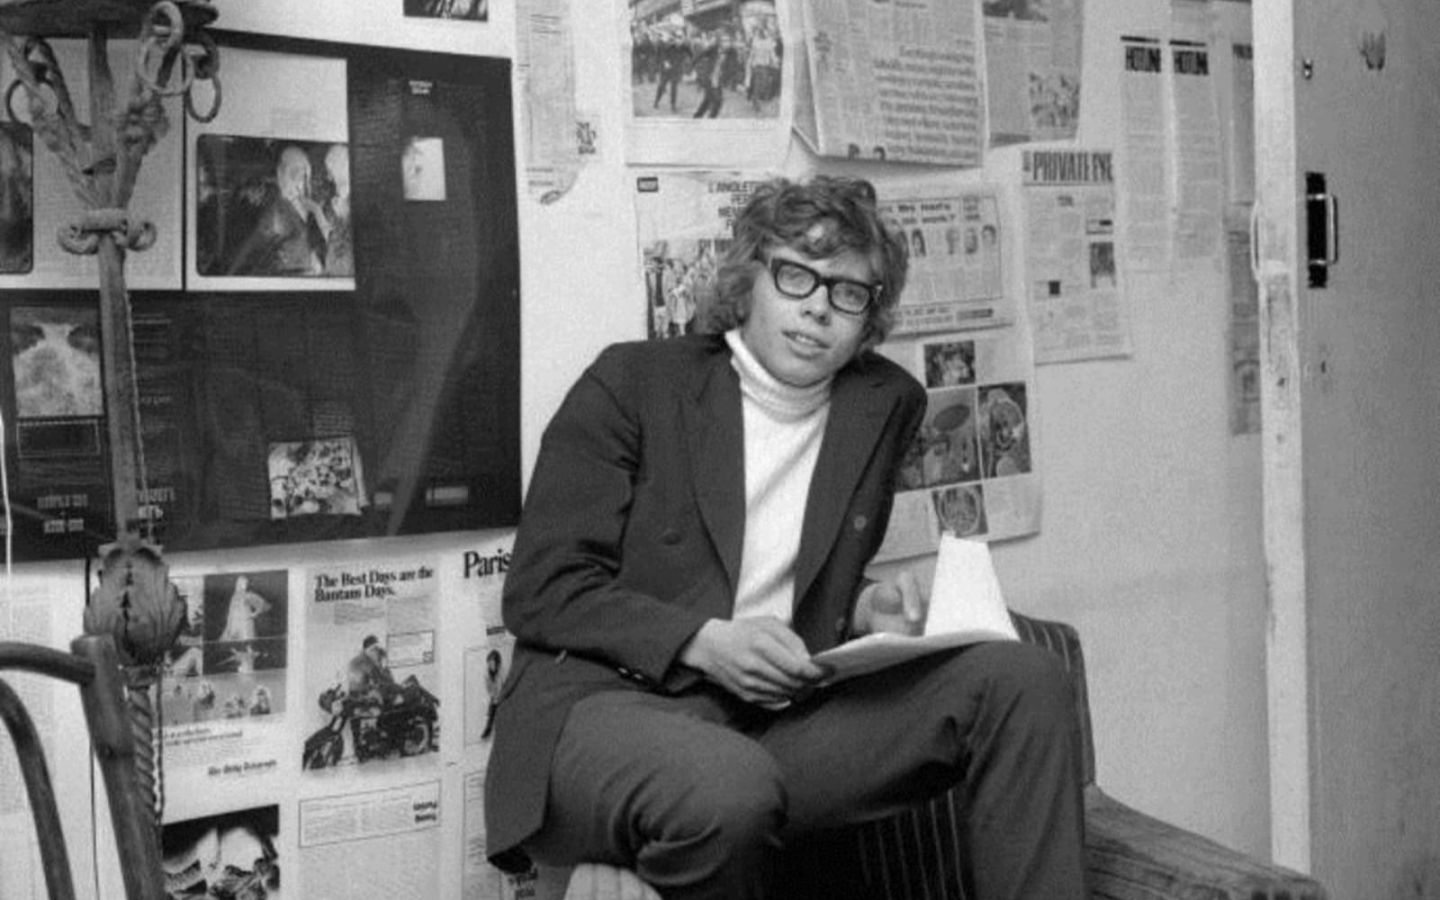 Black and white photo of a young Richard Branson as a student reading